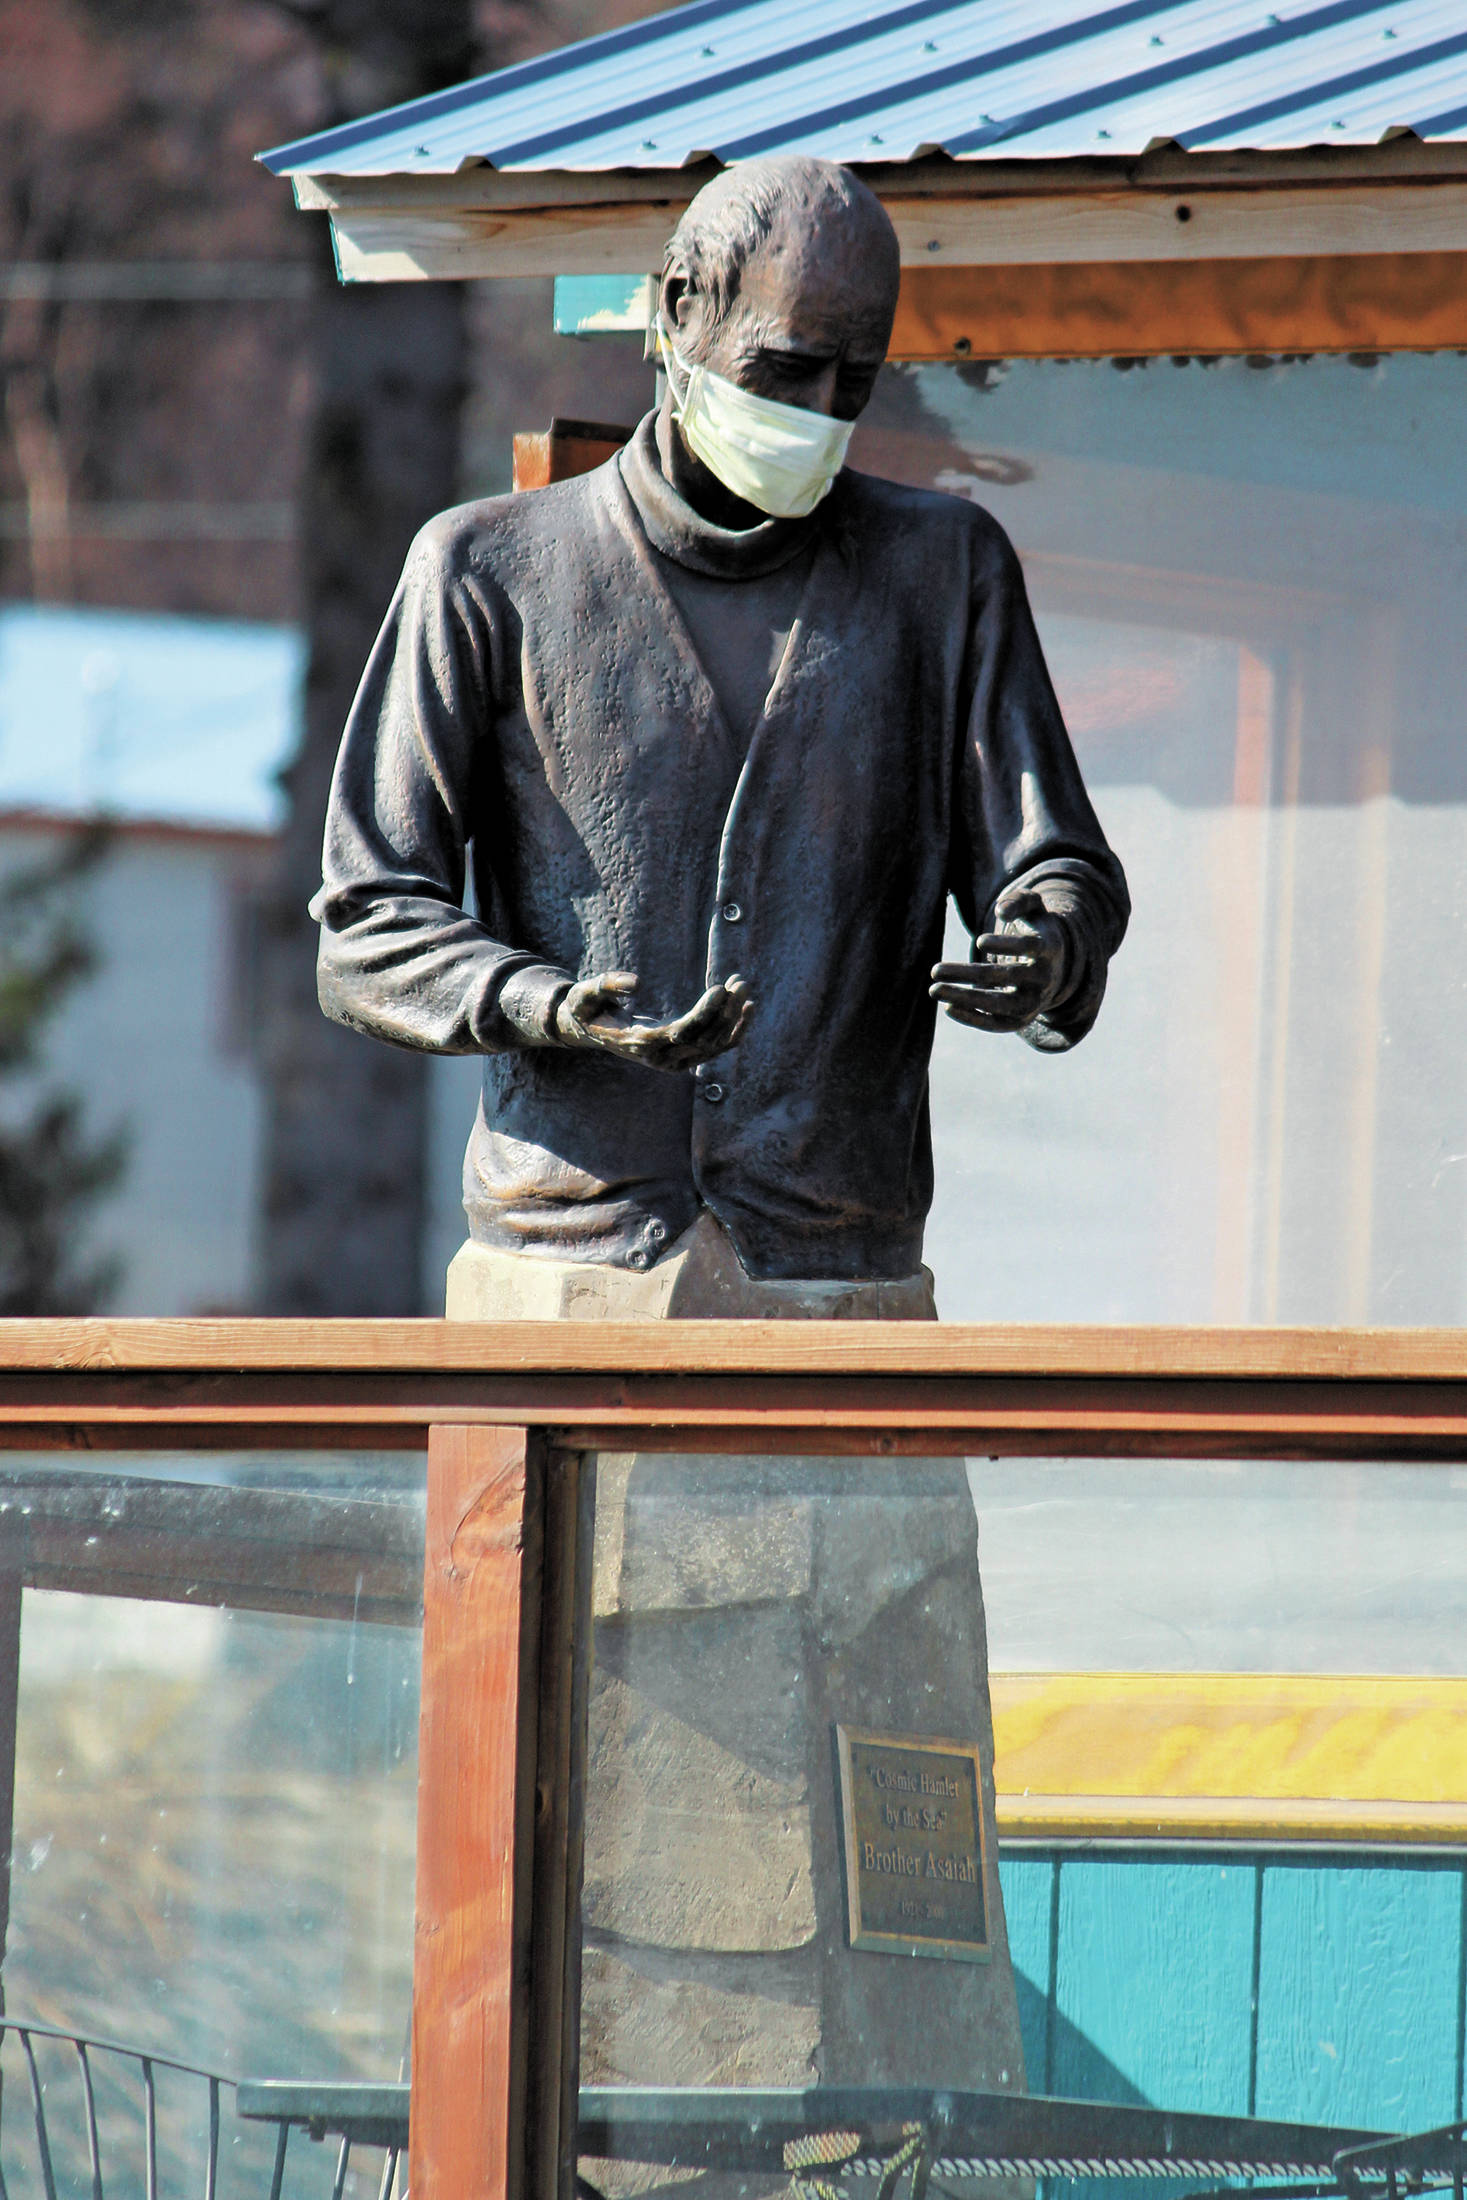 The statue of Brother Asaiah Bates that stands at Cosmic Kitchen is seen wearing a mask on Monday, April 6, 2020 in Homer, Alaska. (Photo by Megan Pacer/Homer News)